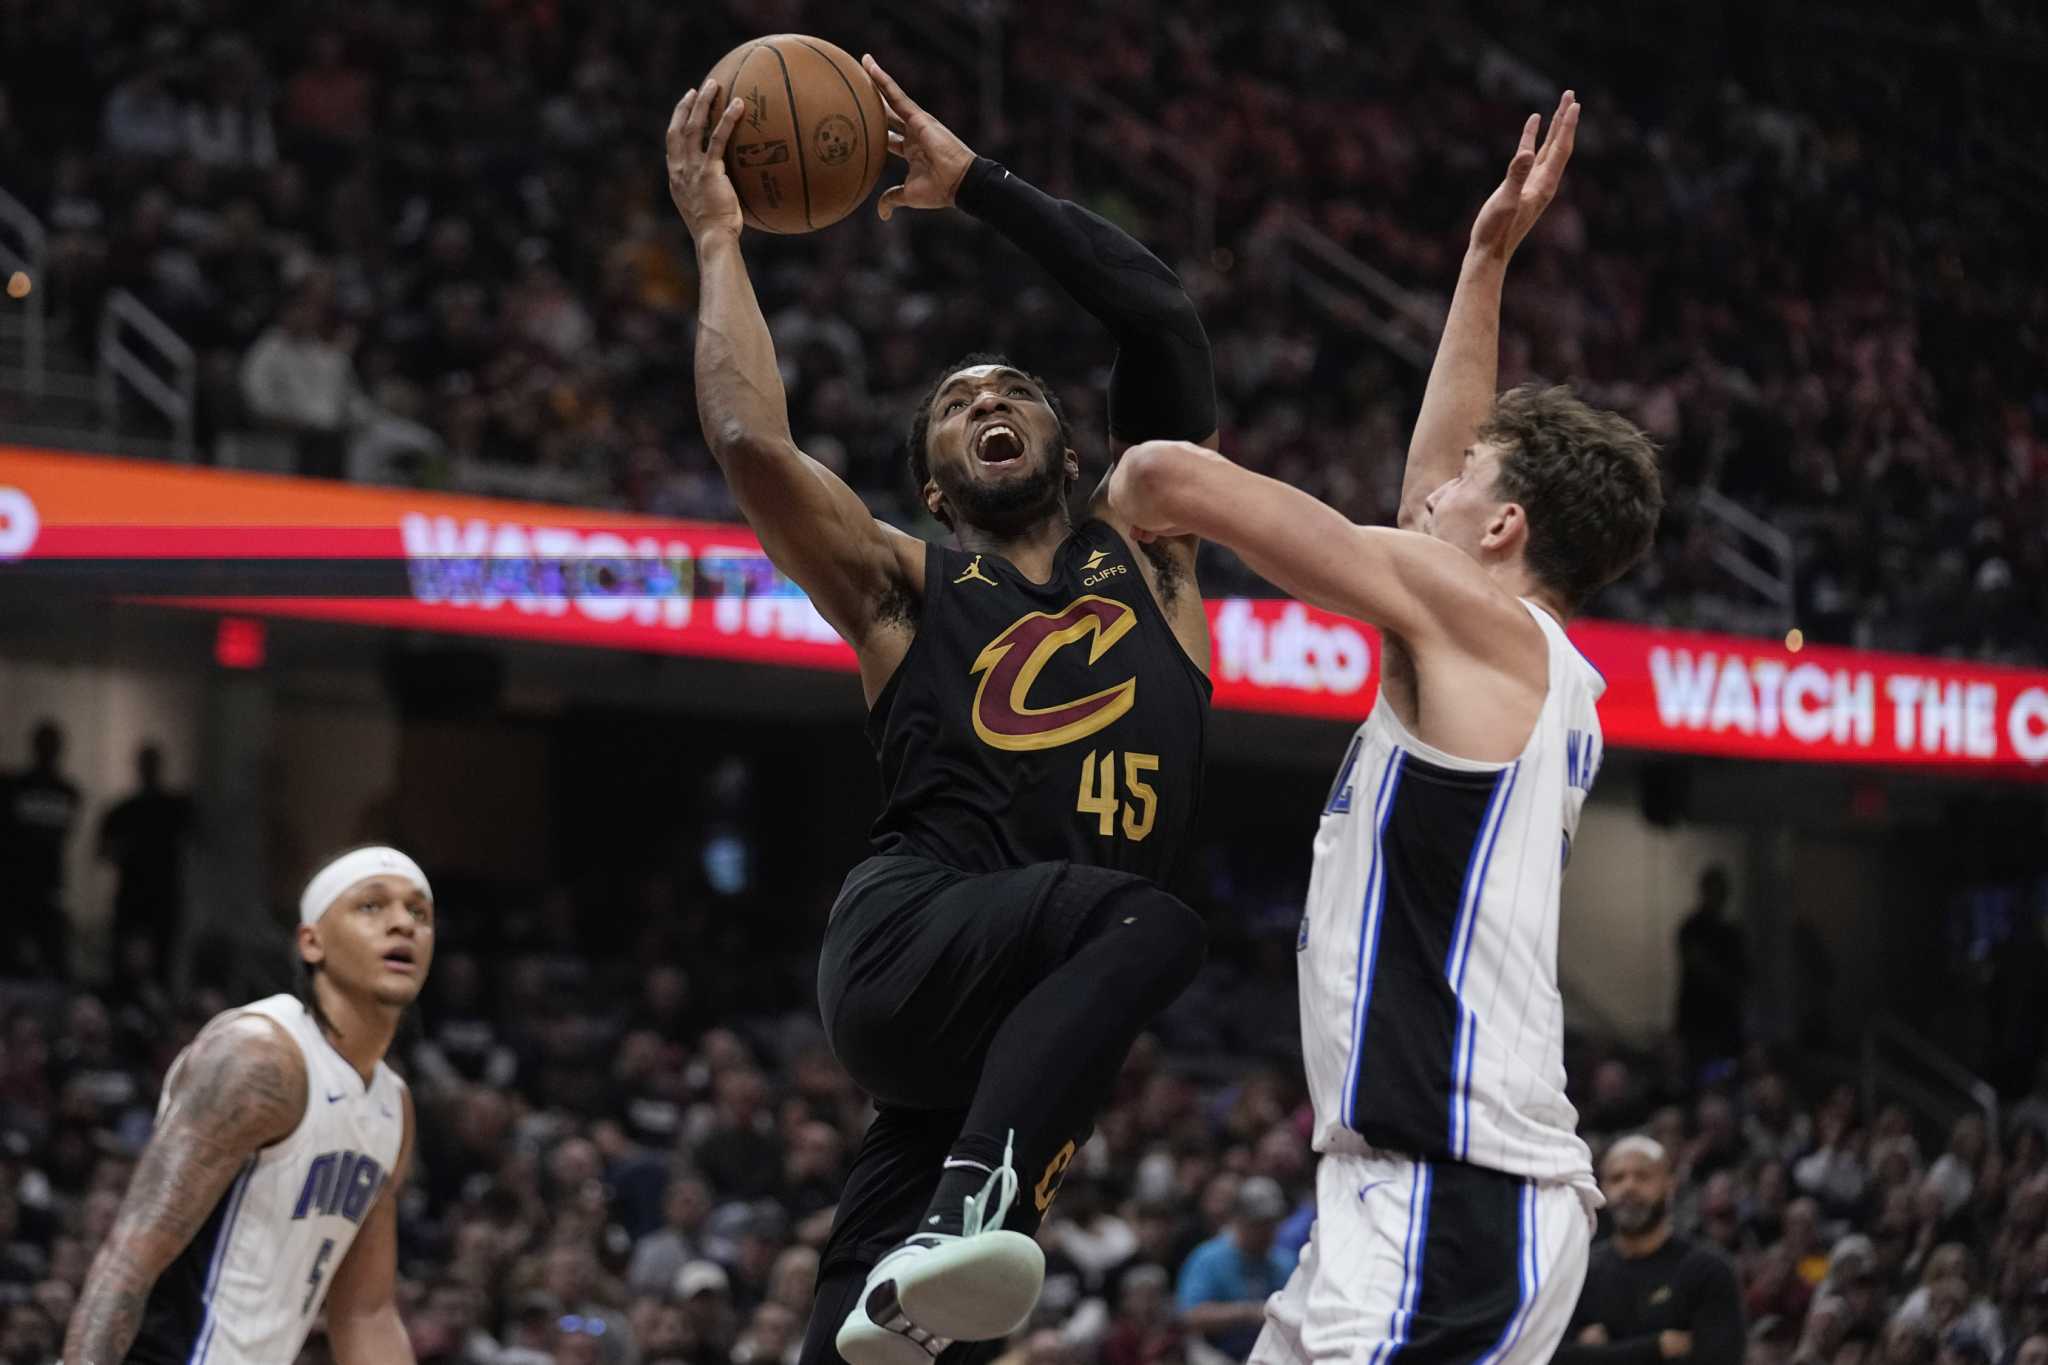 CT's Donovan Mitchell erupts for 89 points in final 2 games of Cavaliers' series win over Magic